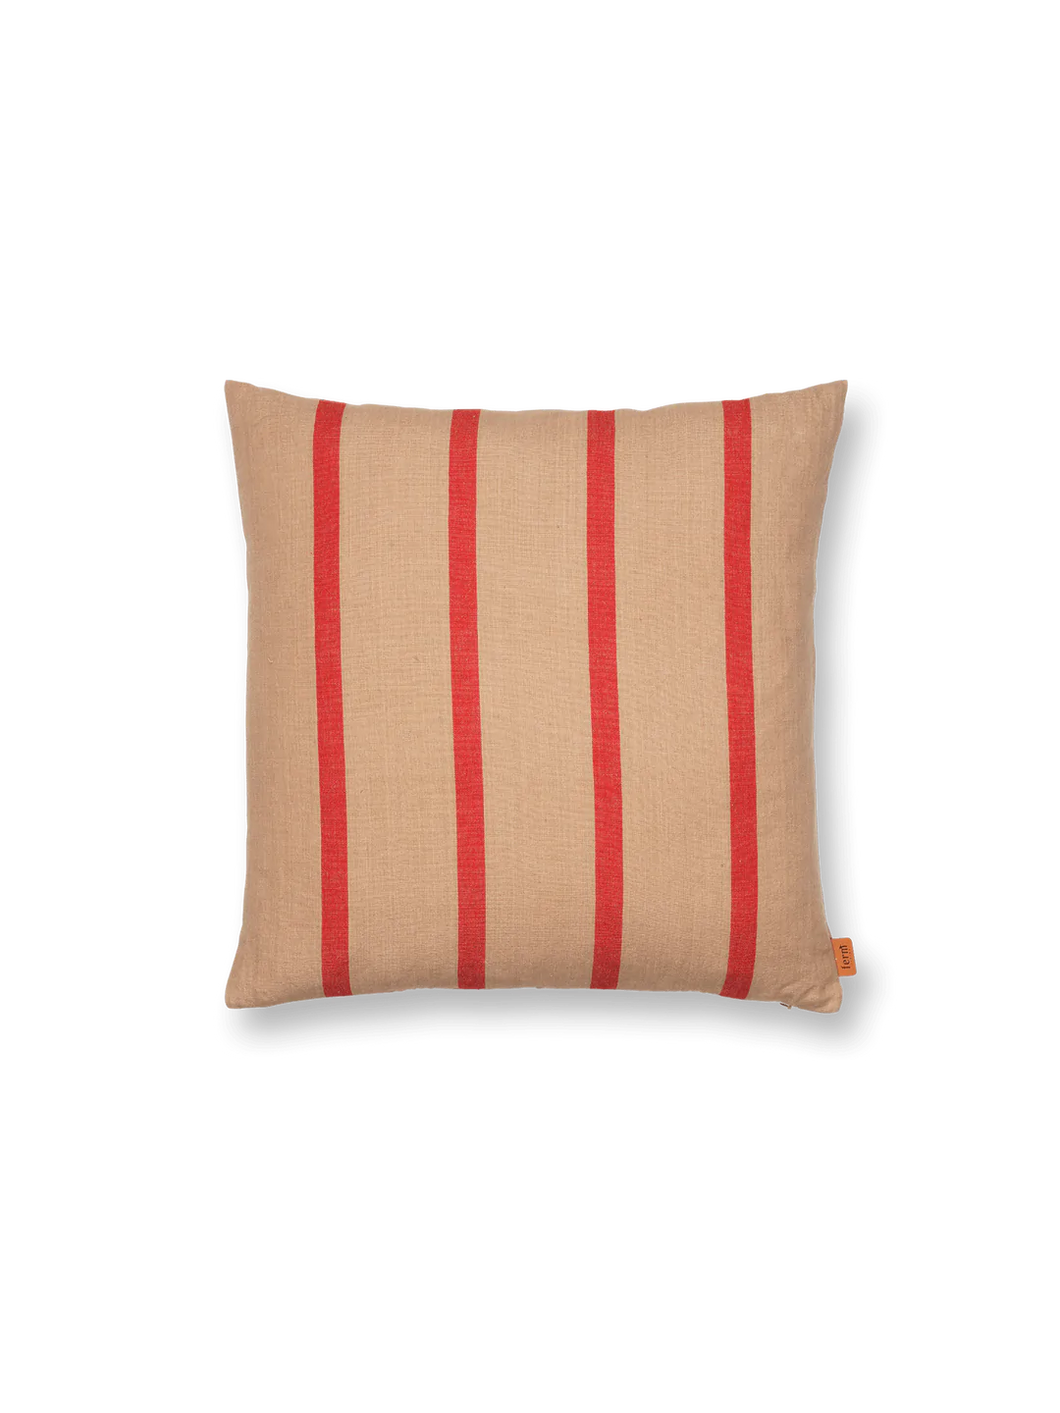 Grand Coussin rayure